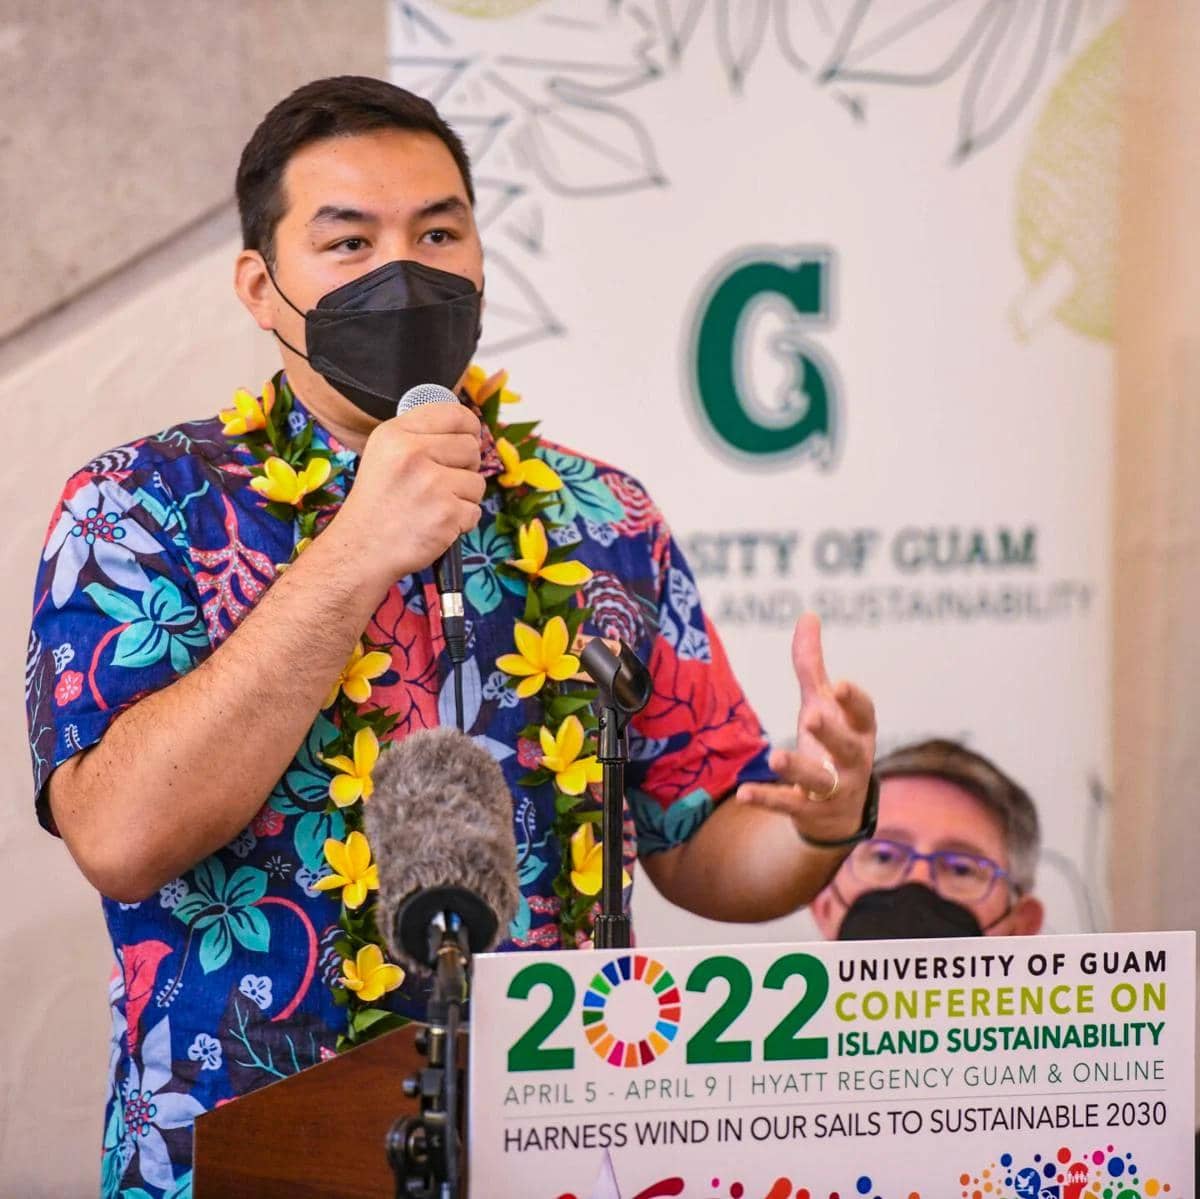 CIS Director Austin Shelton shares the importance of restoring and preserving Guam's coral reefs.